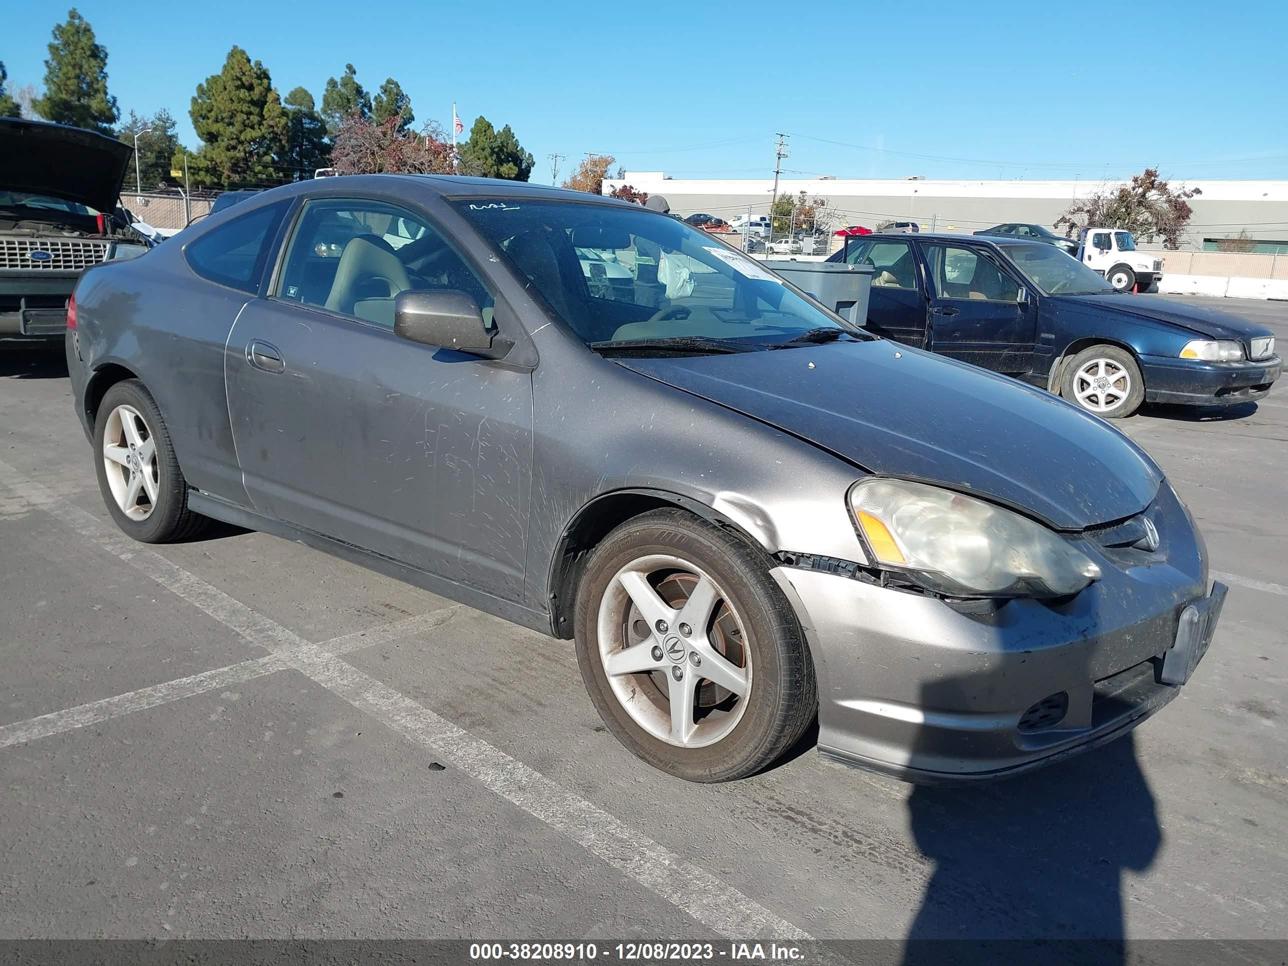 VIN: JH4DC53034S019362 - acura rsx